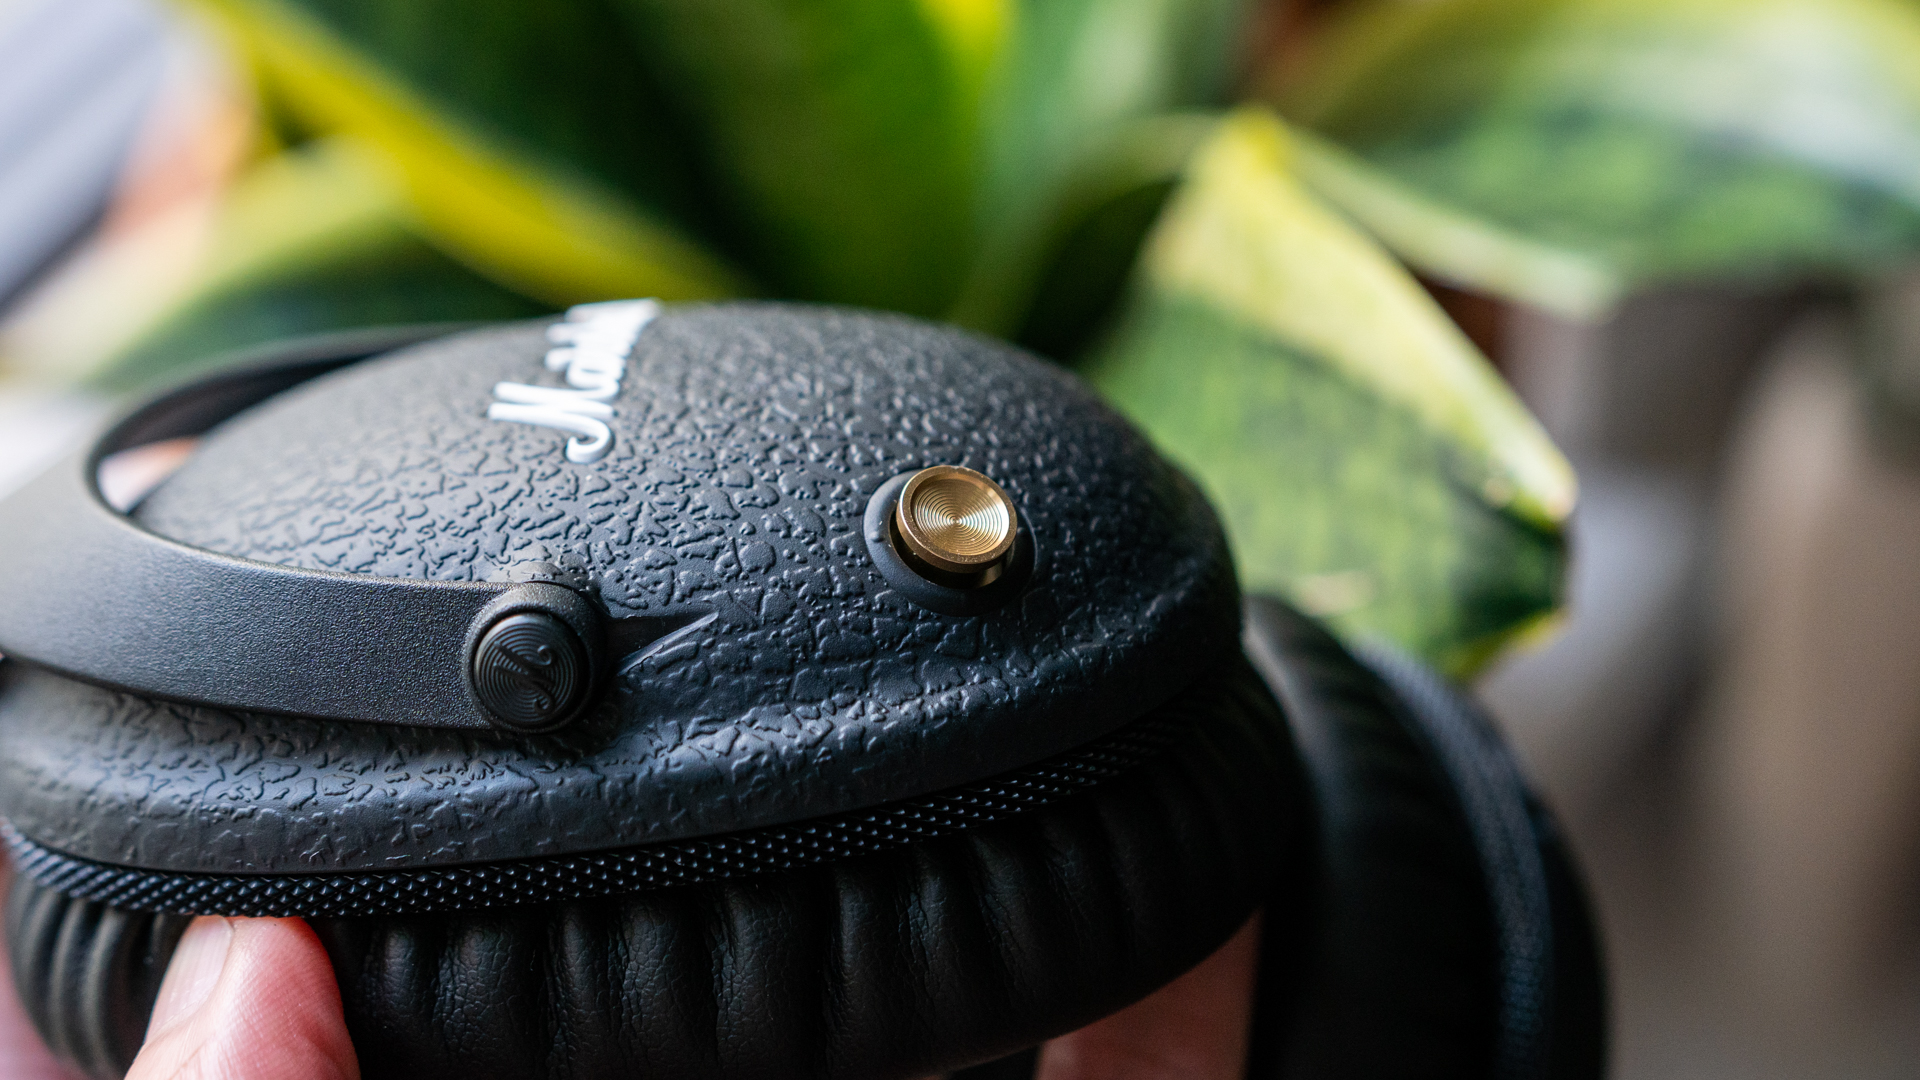 Close-up of golden control knob on the Marshall Monitor II ANC headphones in front of green plants